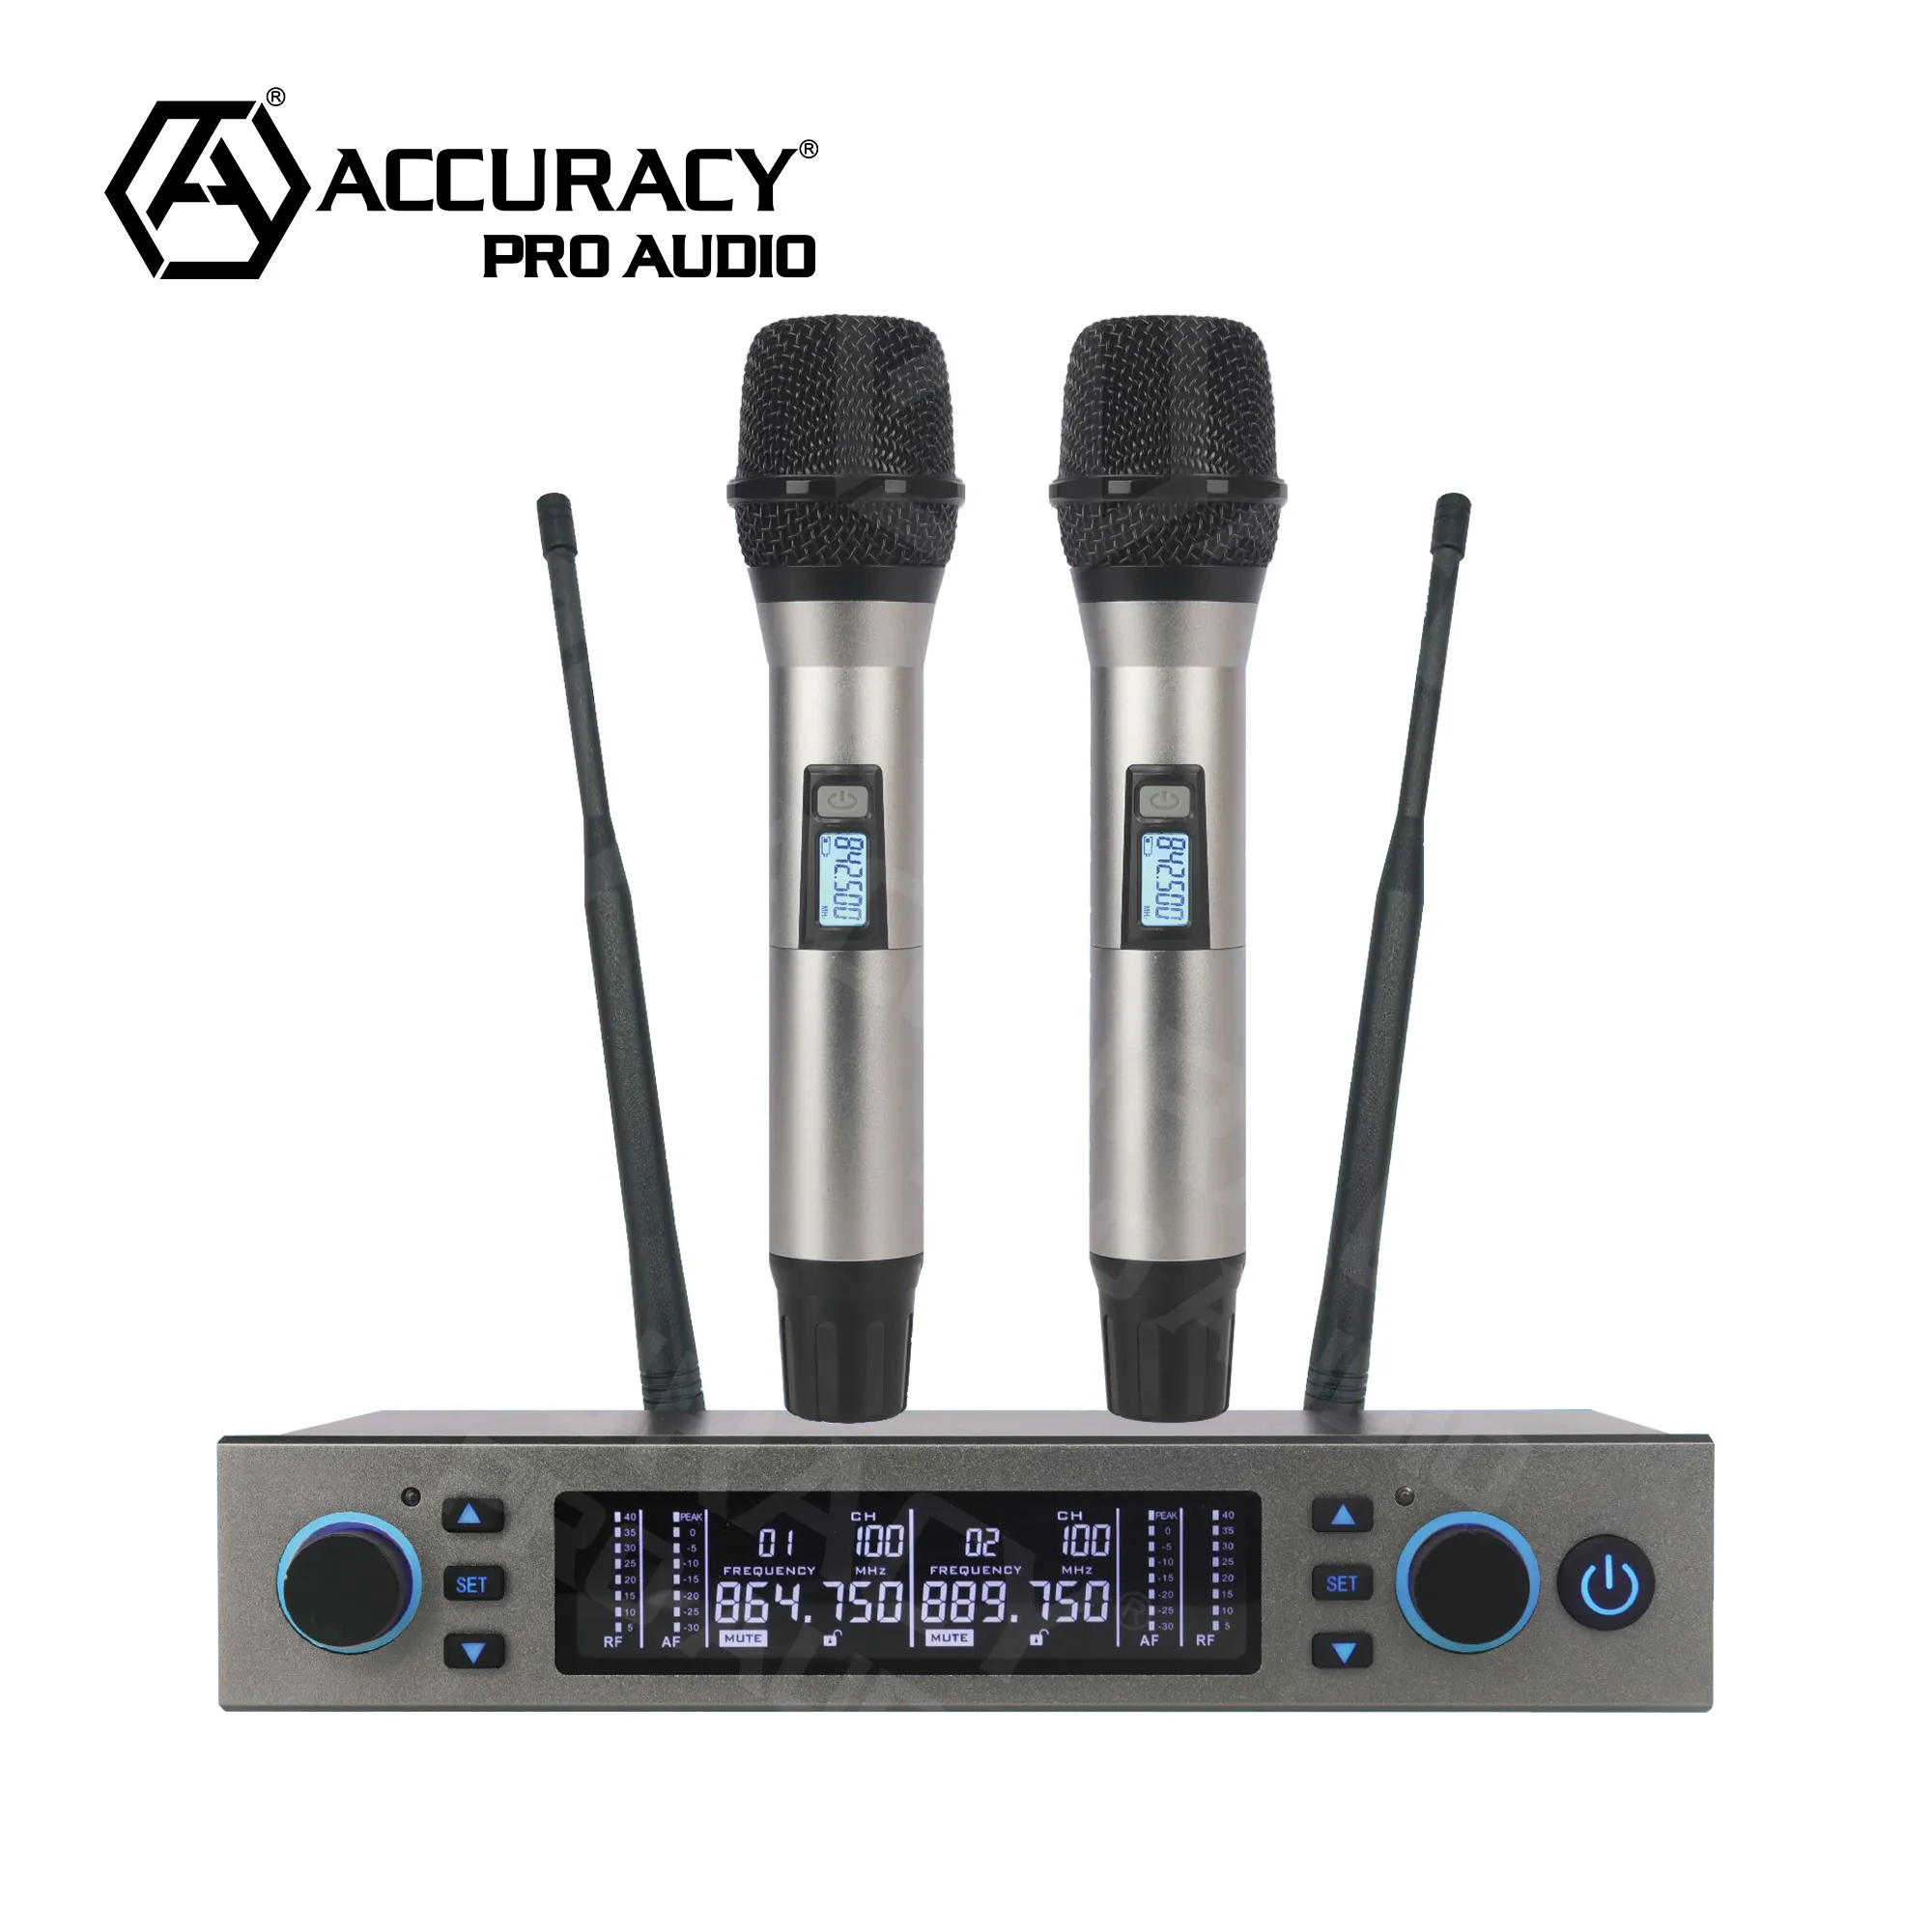 Accuracy UHF-3000 Professional Wireless Microphone Handheld System Portable UHF Microphone Wireless